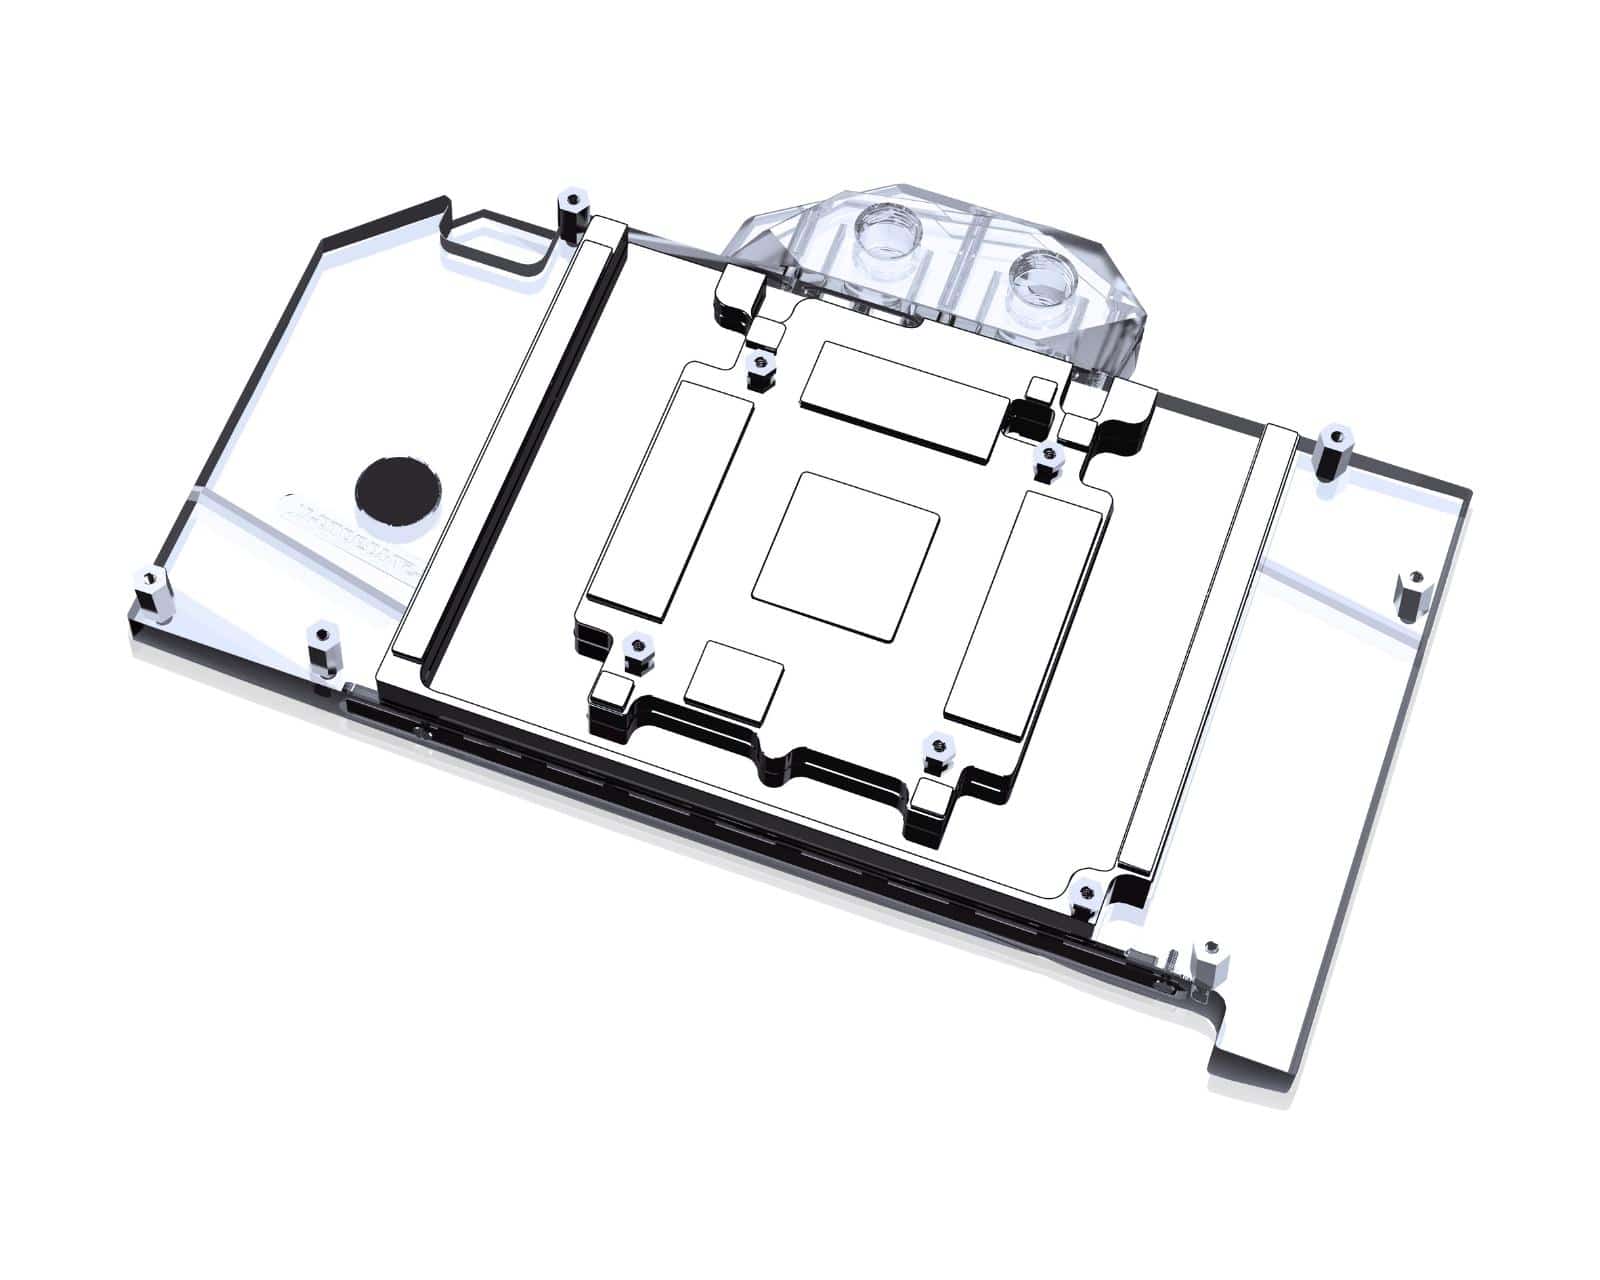 Bykski Full Coverage GPU Water Block and Backplate for Zotac Gaming RTX 4090 Series (N-ST4090TQ-X-V2) - PrimoChill - KEEPING IT COOL